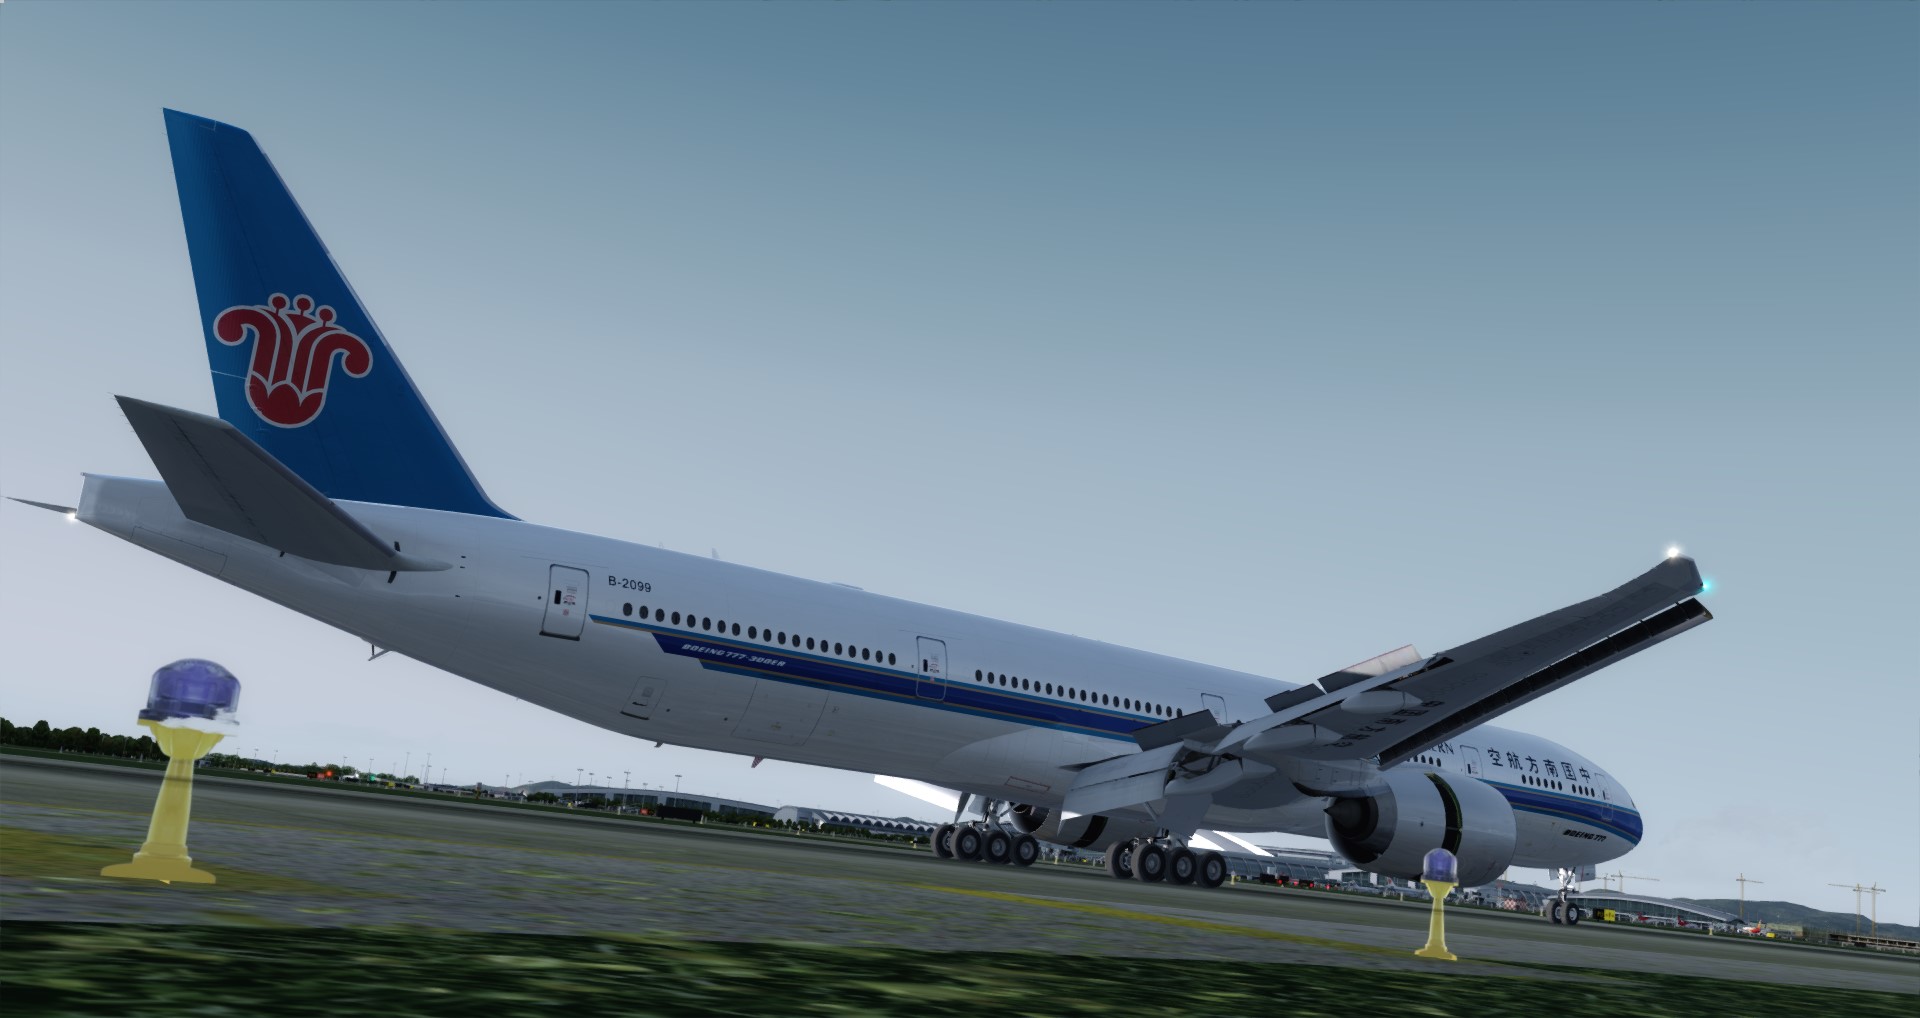 P3D V4 77W China Southern Airlines WADD-ZGGG 营救同胞-5527 